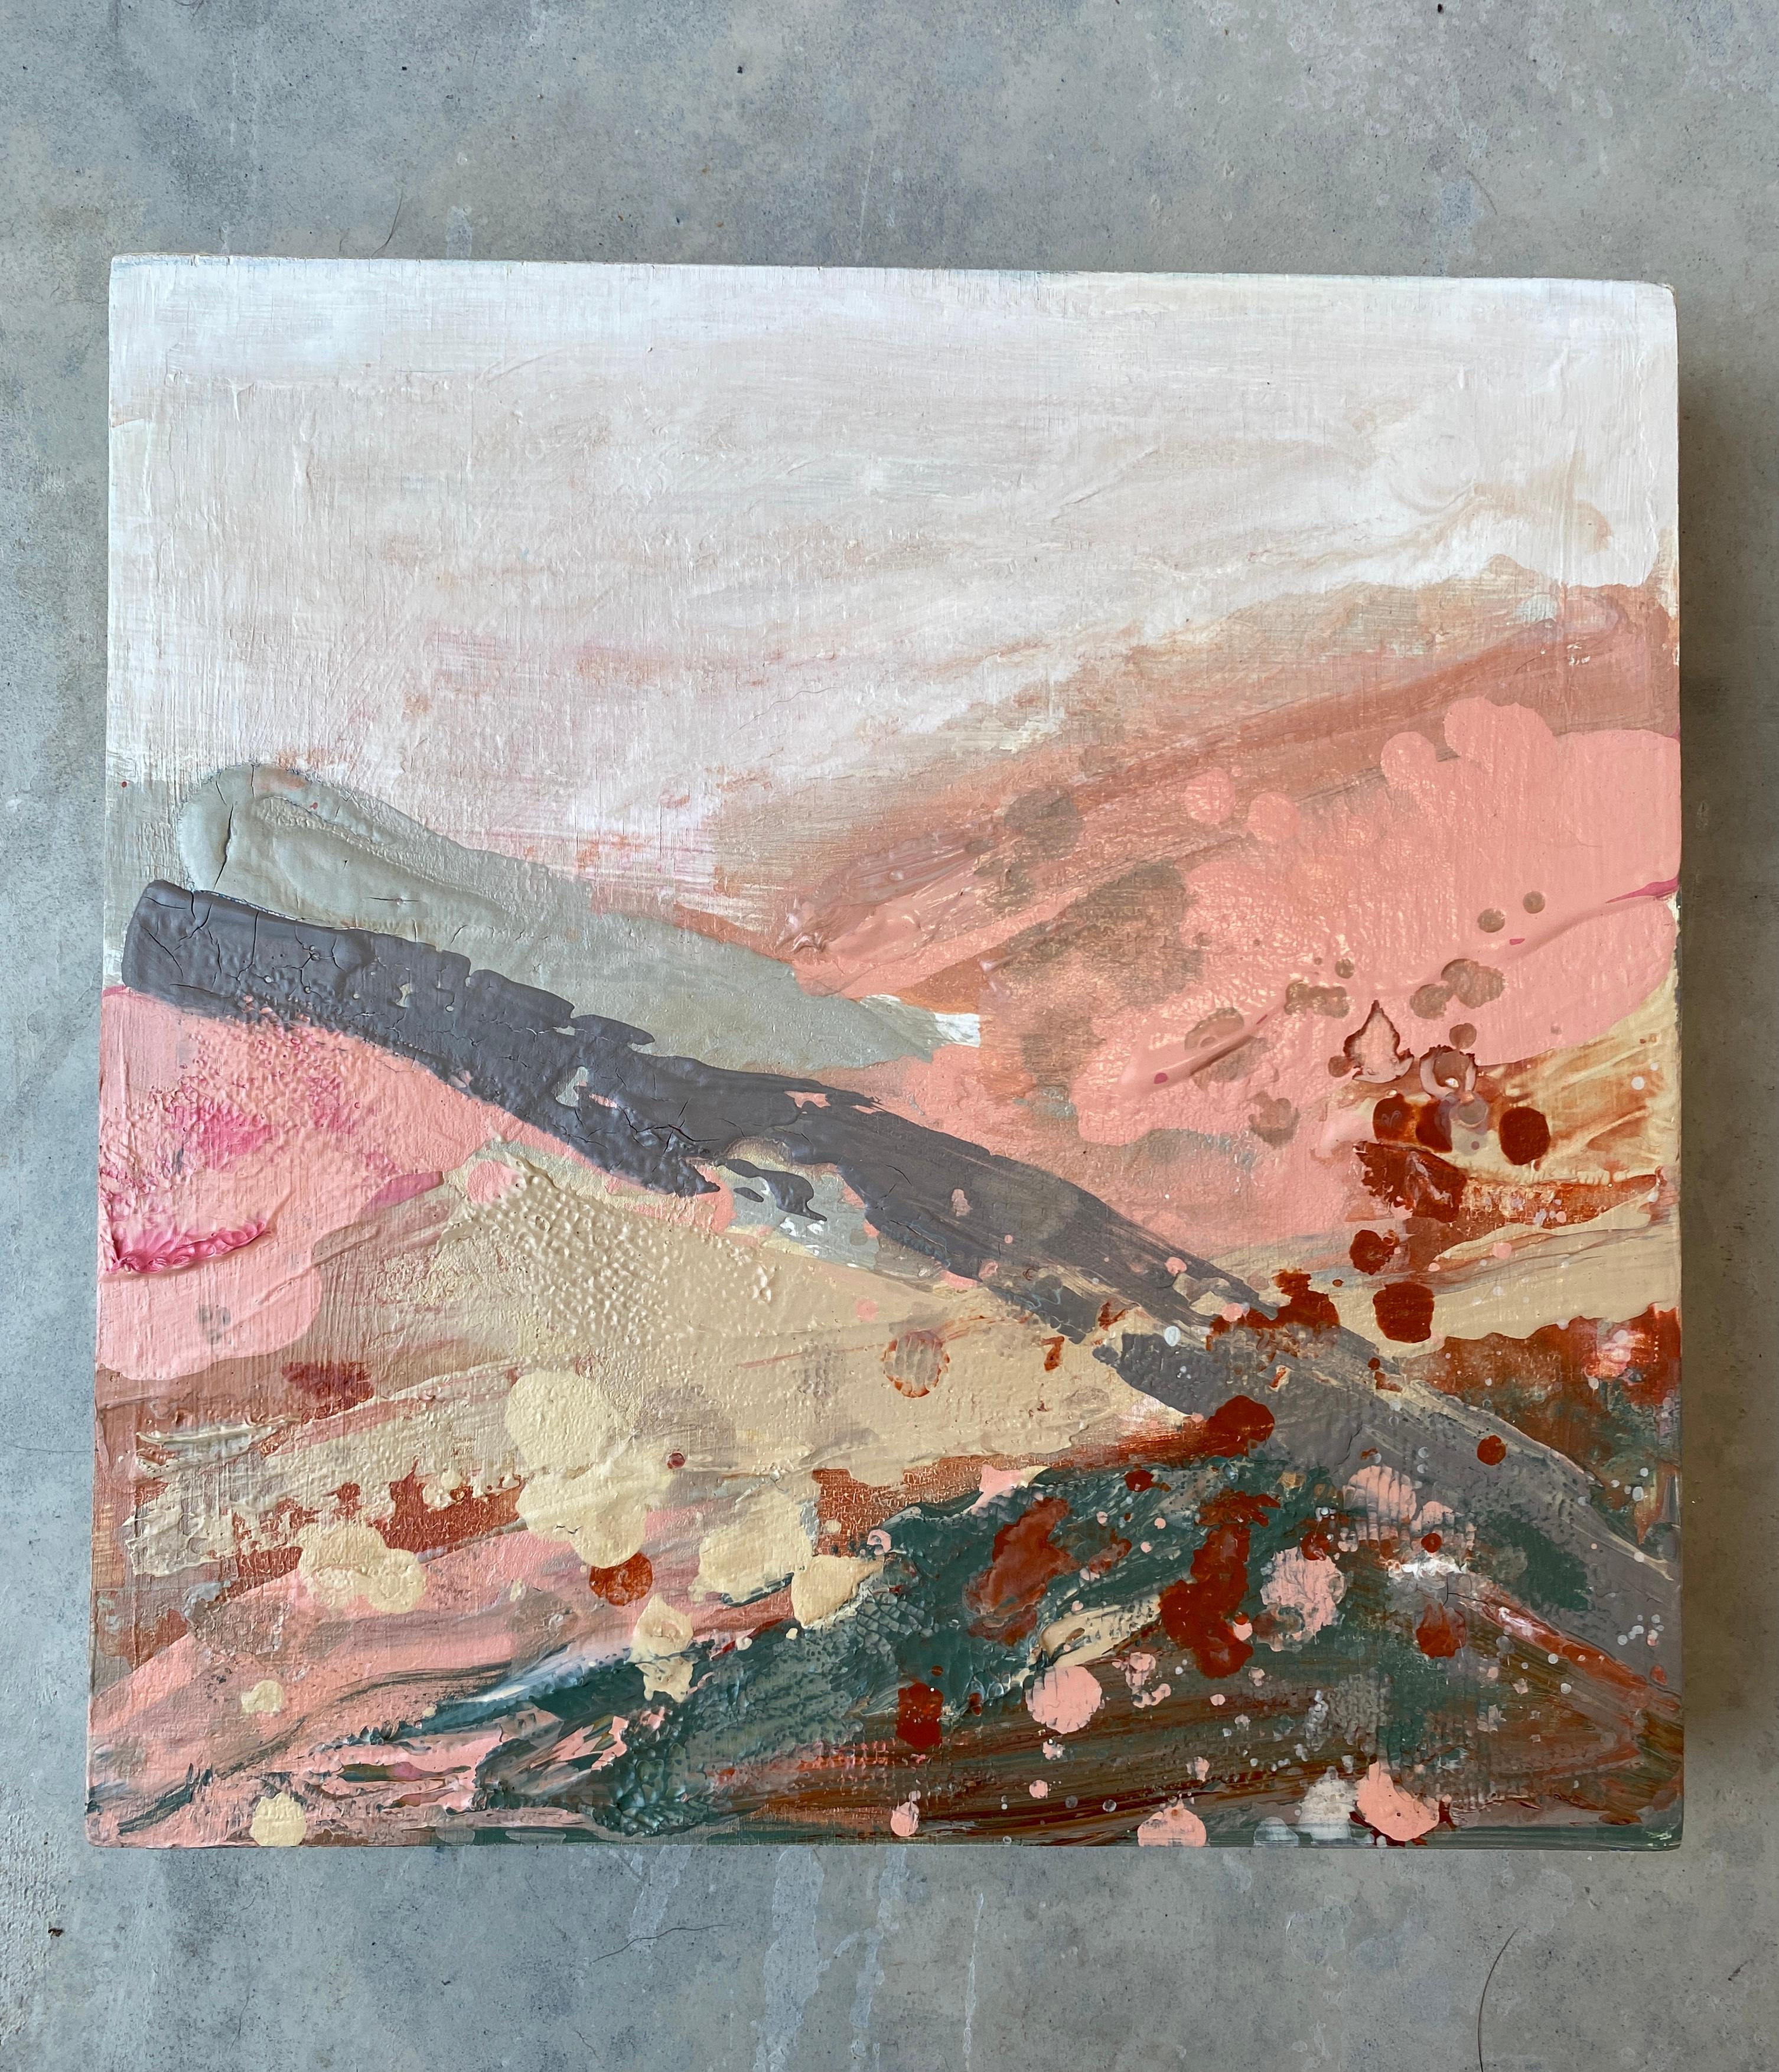 'Mountain sketch no1' a small square work on timber, abstract expressionist landscape. A sweet happy original painting to add light and joy to any room or small wall space.

This small collection is inspired by Canberra, Australia's national